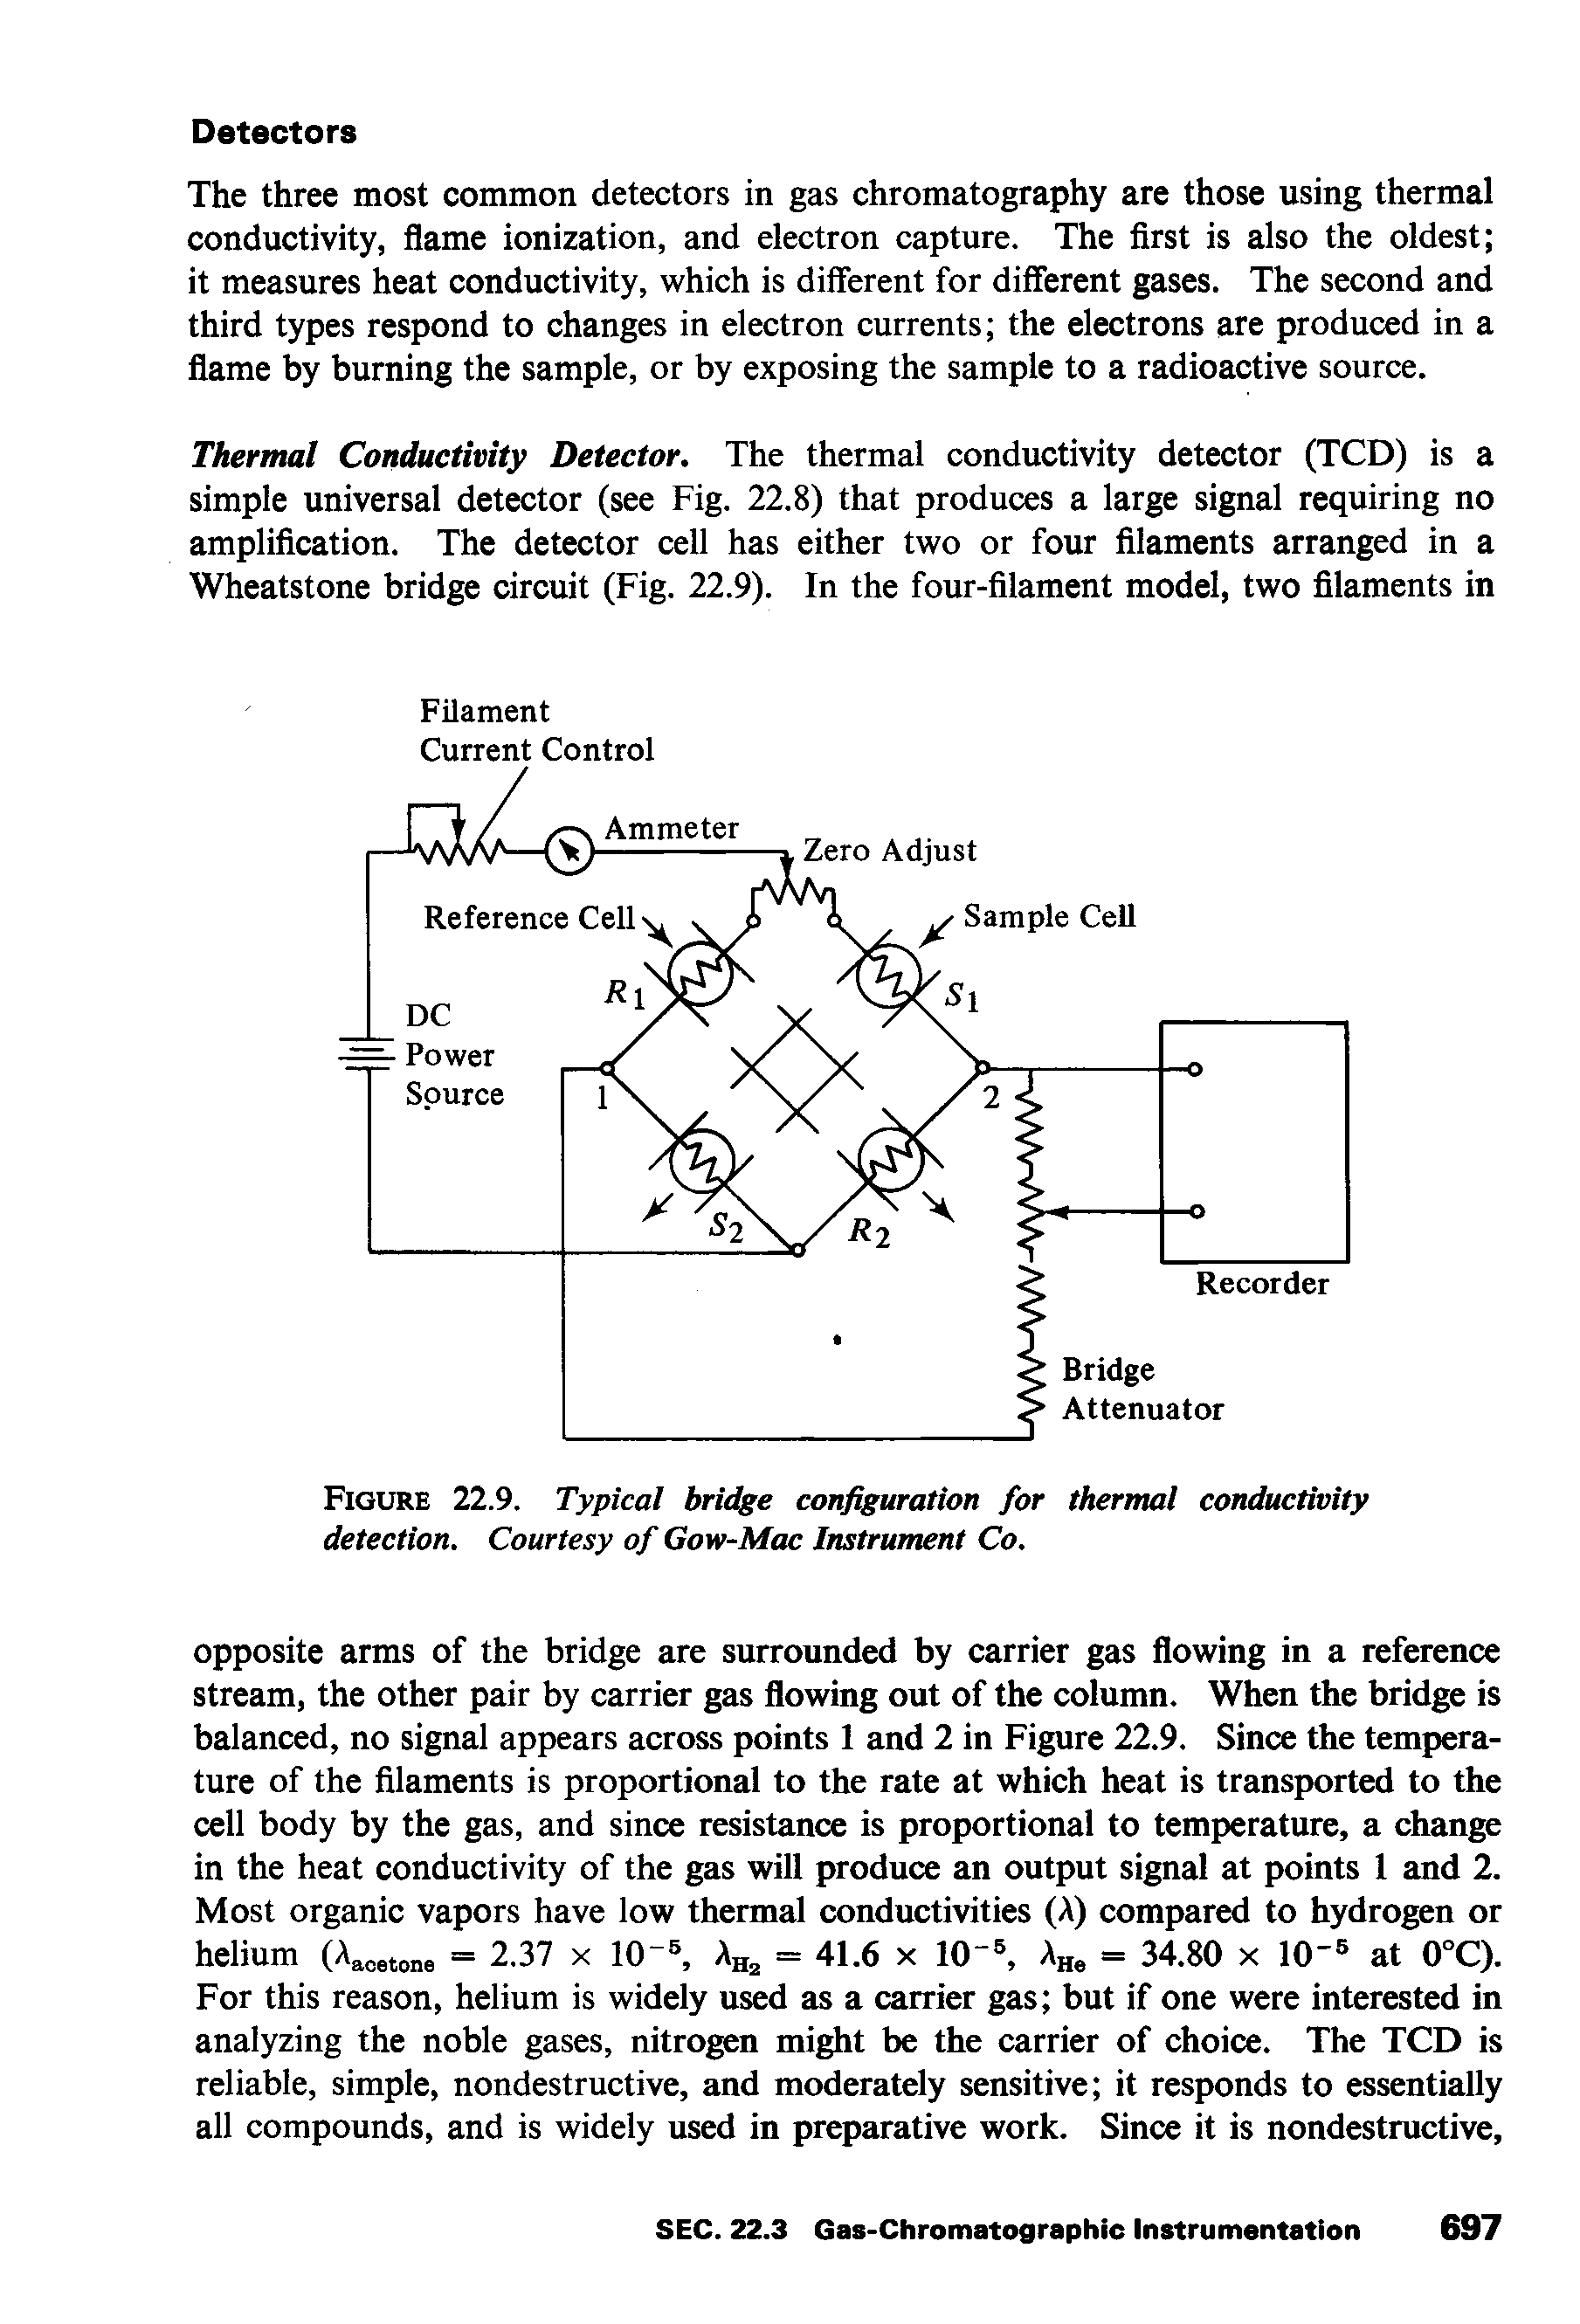 Figure 22.9. Typical bridge configuration for thermal conductivity detection. Courtesy of Gow-Mac Instrument Co.